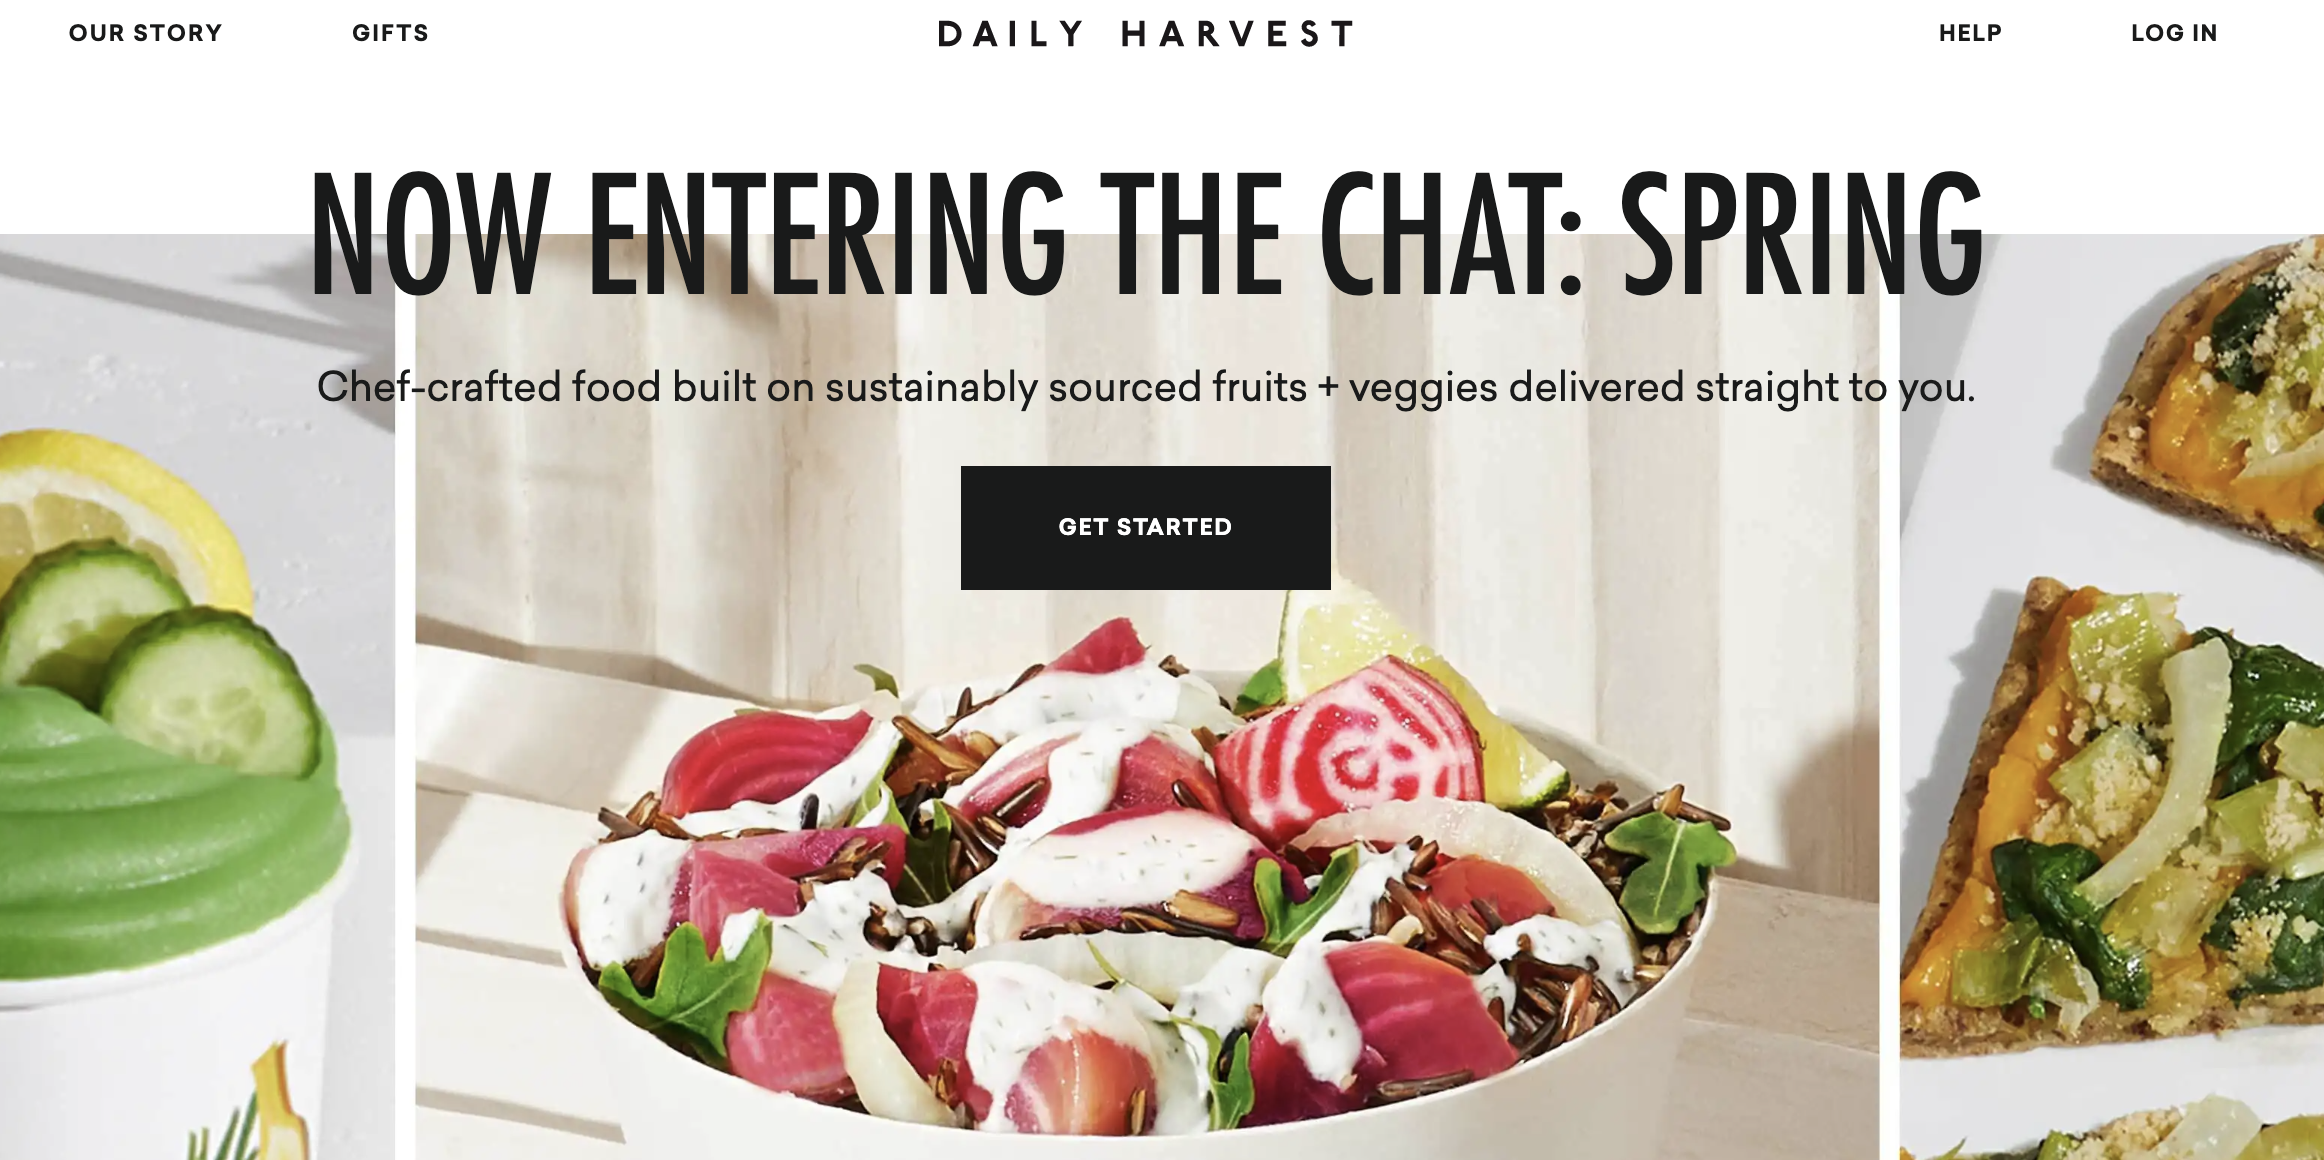 screenshot from Daily Harvest website